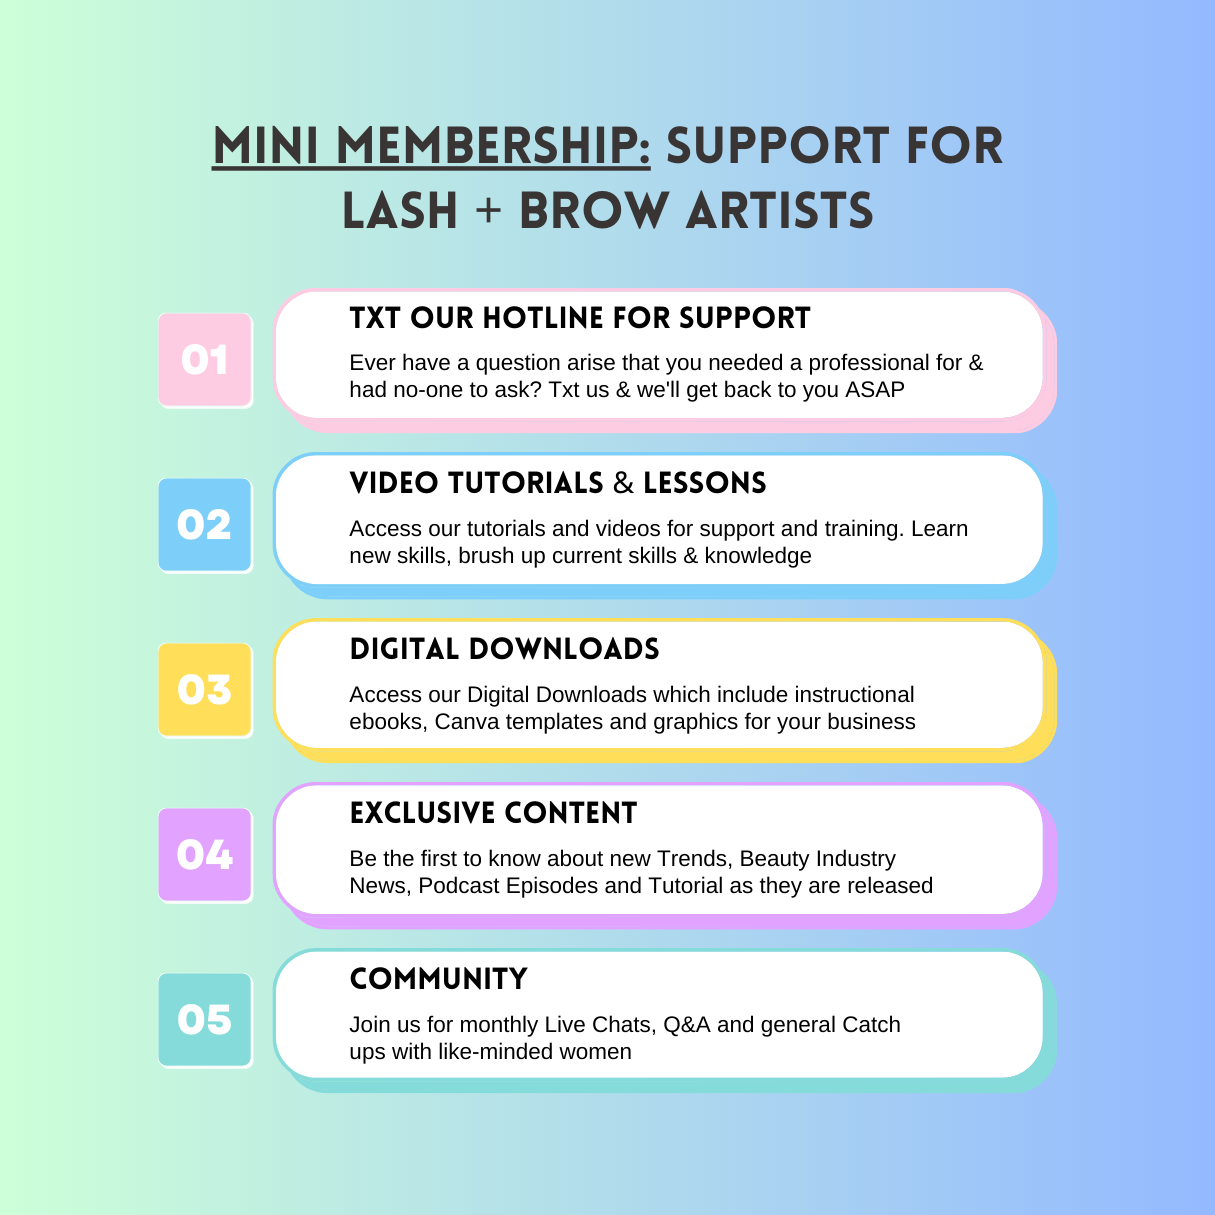 Mini Membership Monthly: Support for Lash & Brow Artists